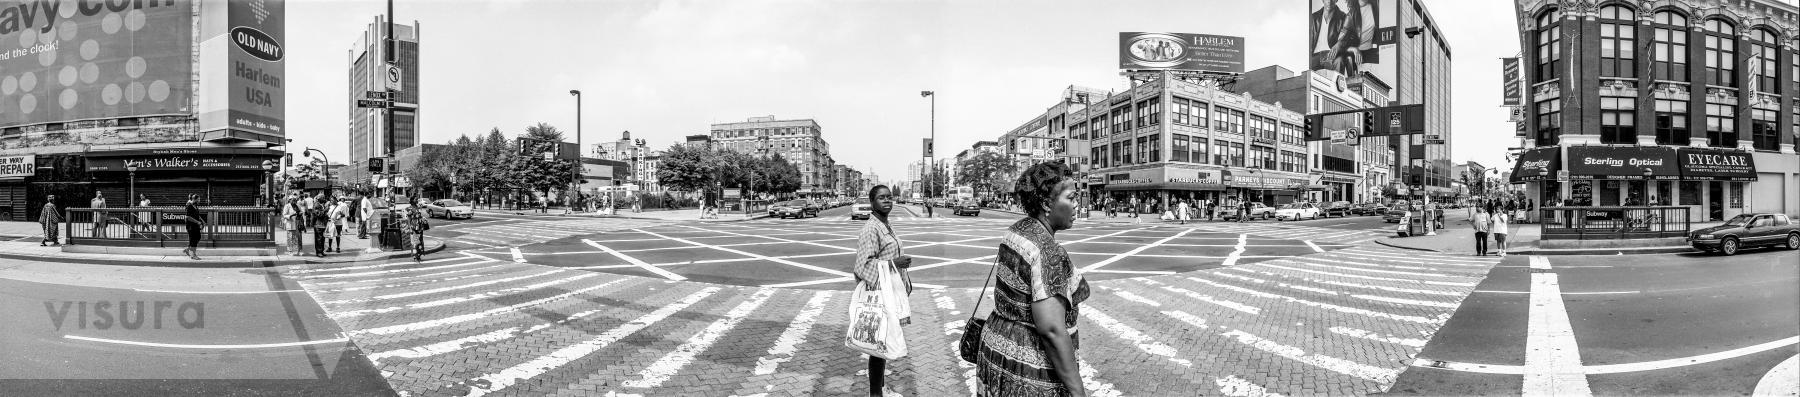 Purchase Lenox Avenue Panorama, September 2000 by Kenneth Nelson